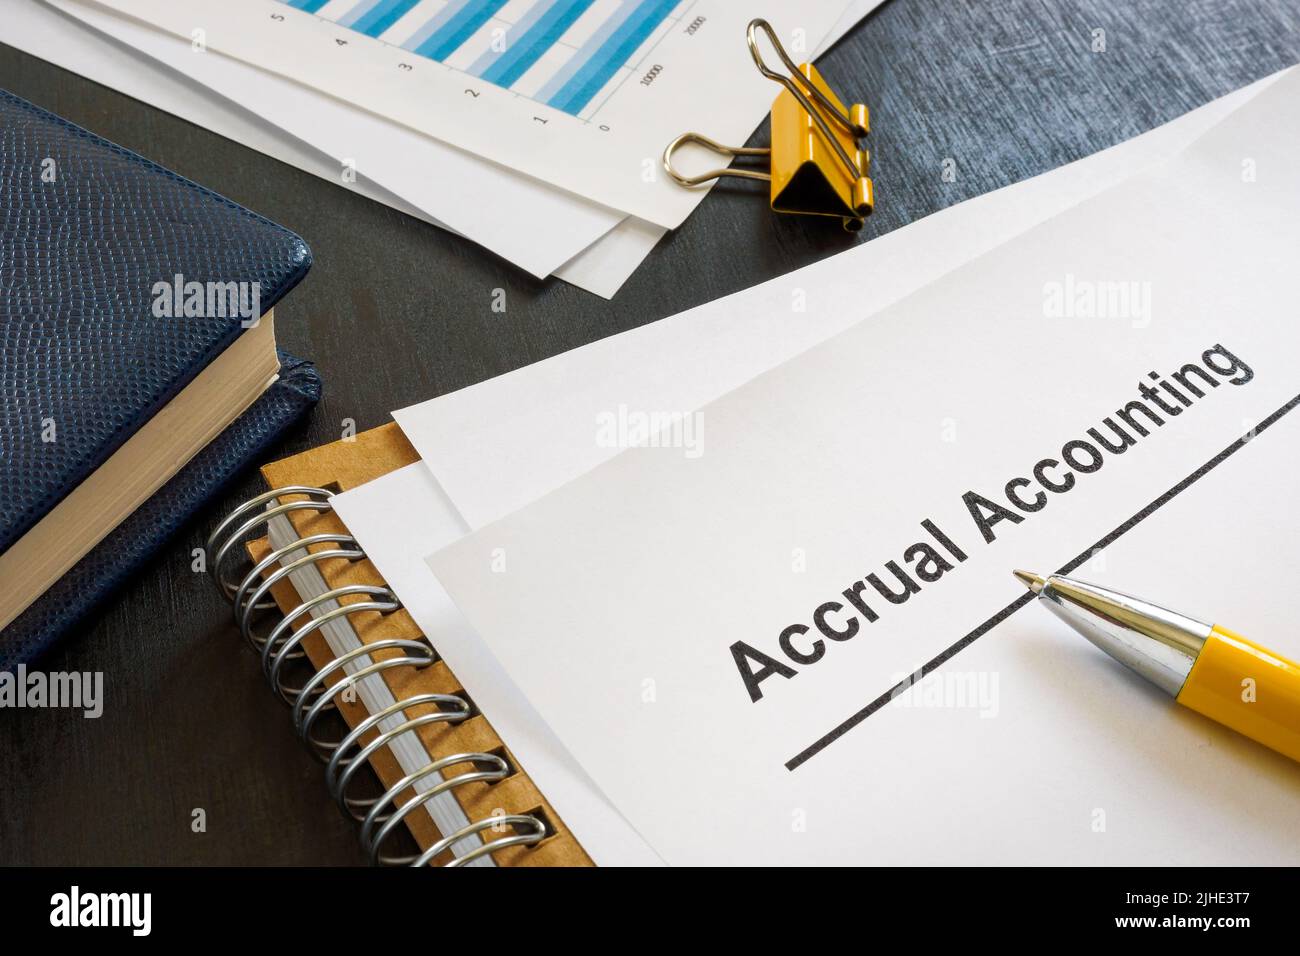 Documents about accrual accounting near notepad and pen. Stock Photo